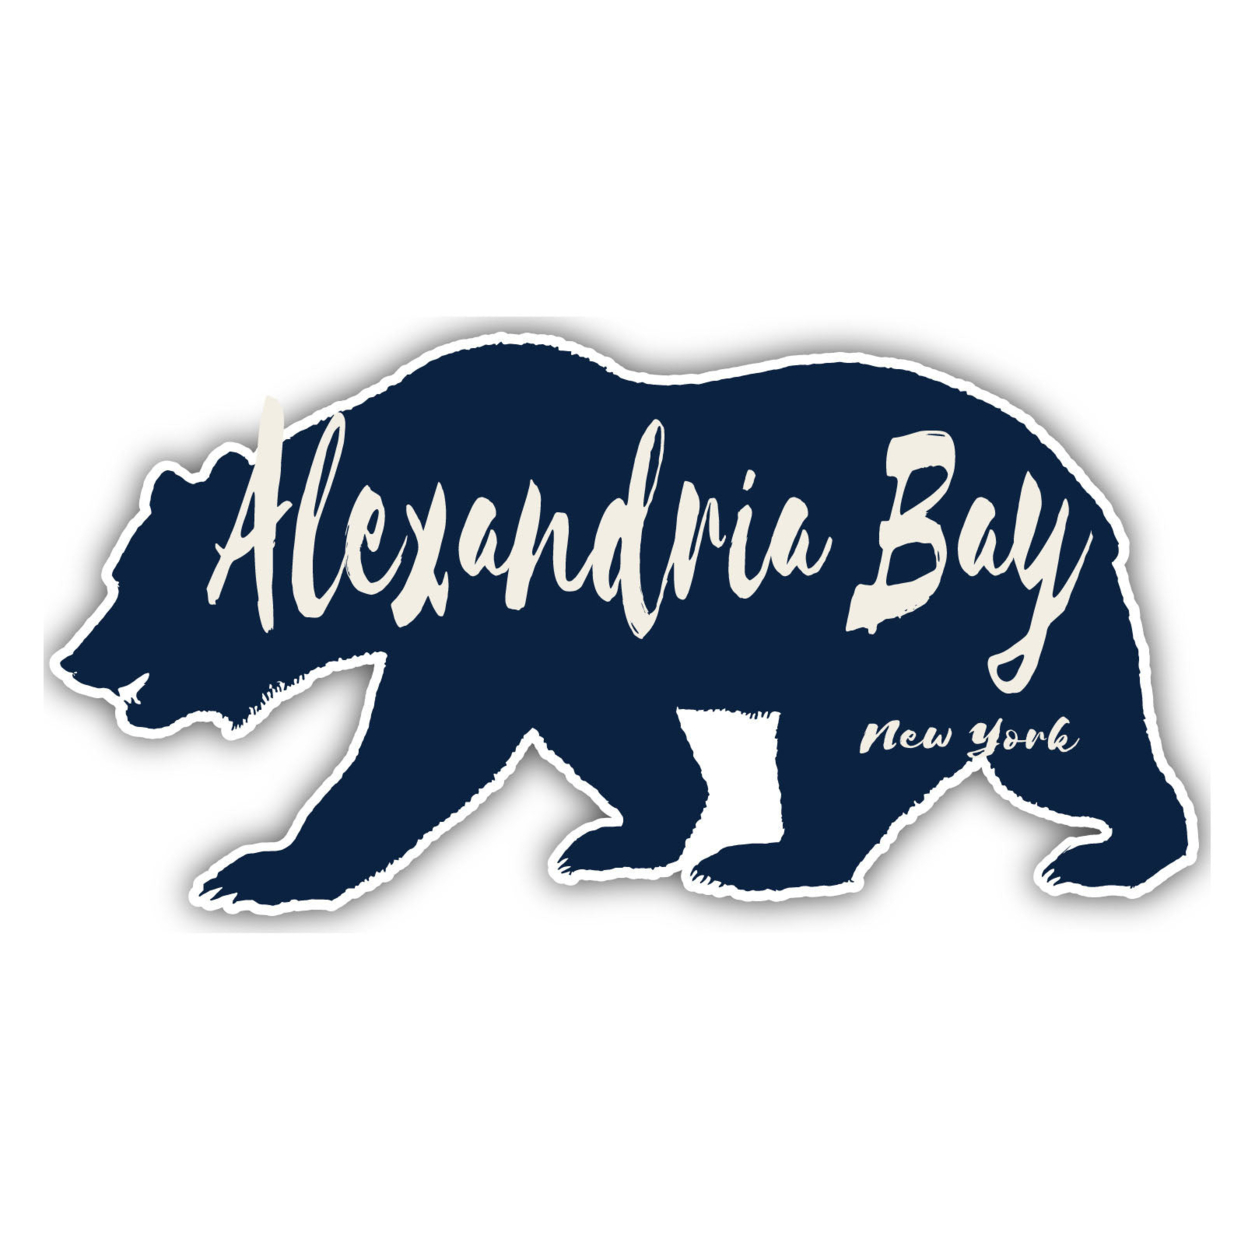 Alexandria Bay New York Souvenir Decorative Stickers (Choose Theme And Size) - 4-Pack, 6-Inch, Adventures Awaits